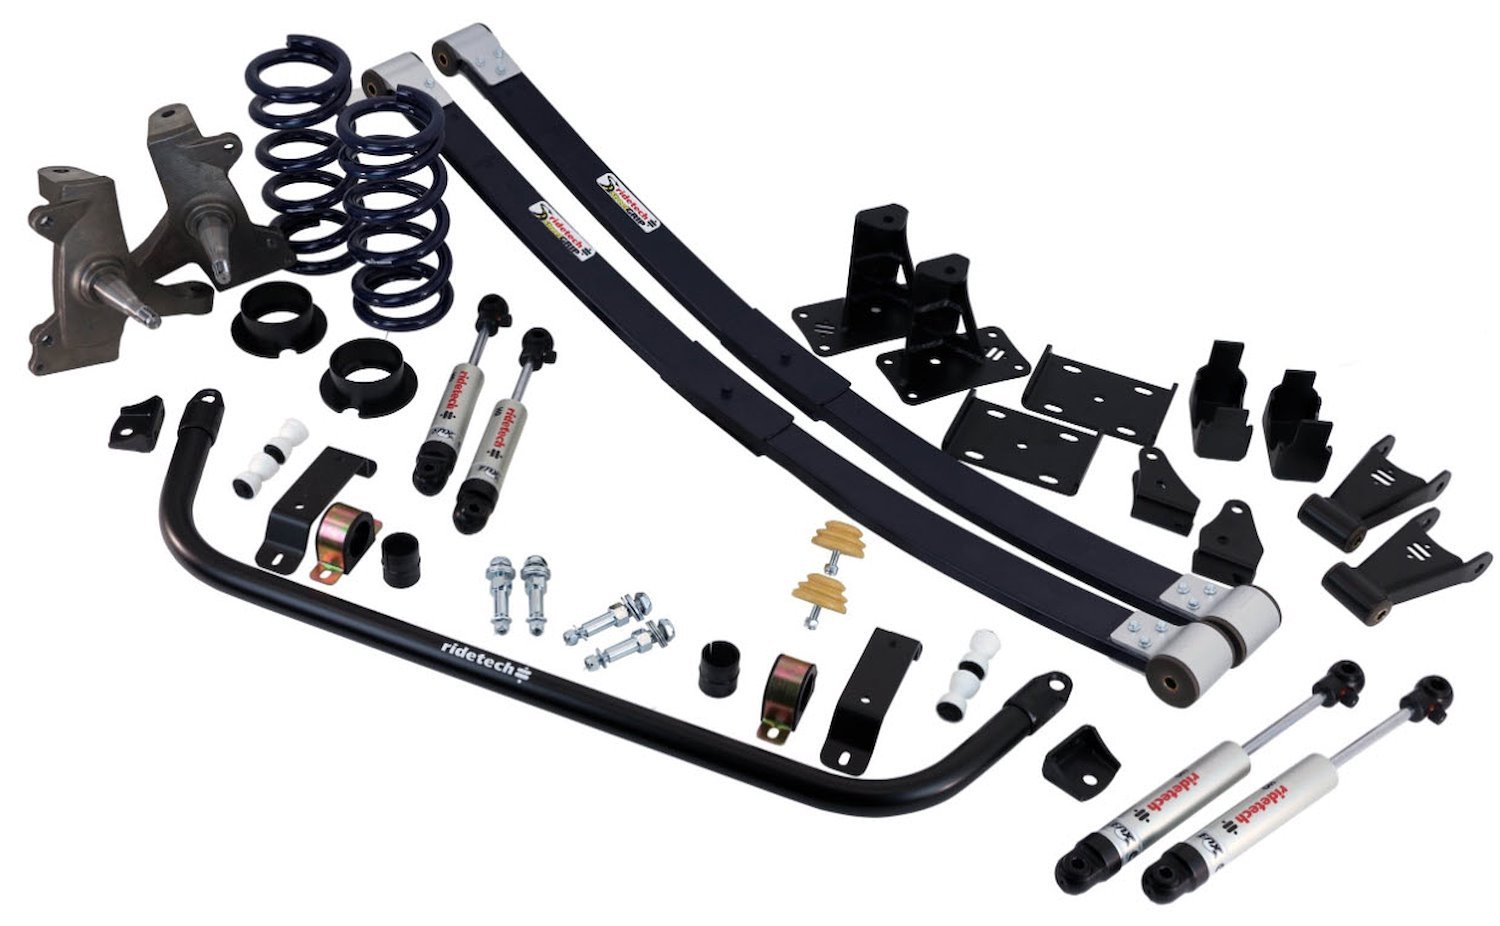 StreetGrip Suspension System for 1973-1987 GM 2WD Trucks w/Small Block, GM LS Engines (No Control Arm Bushing Kit)